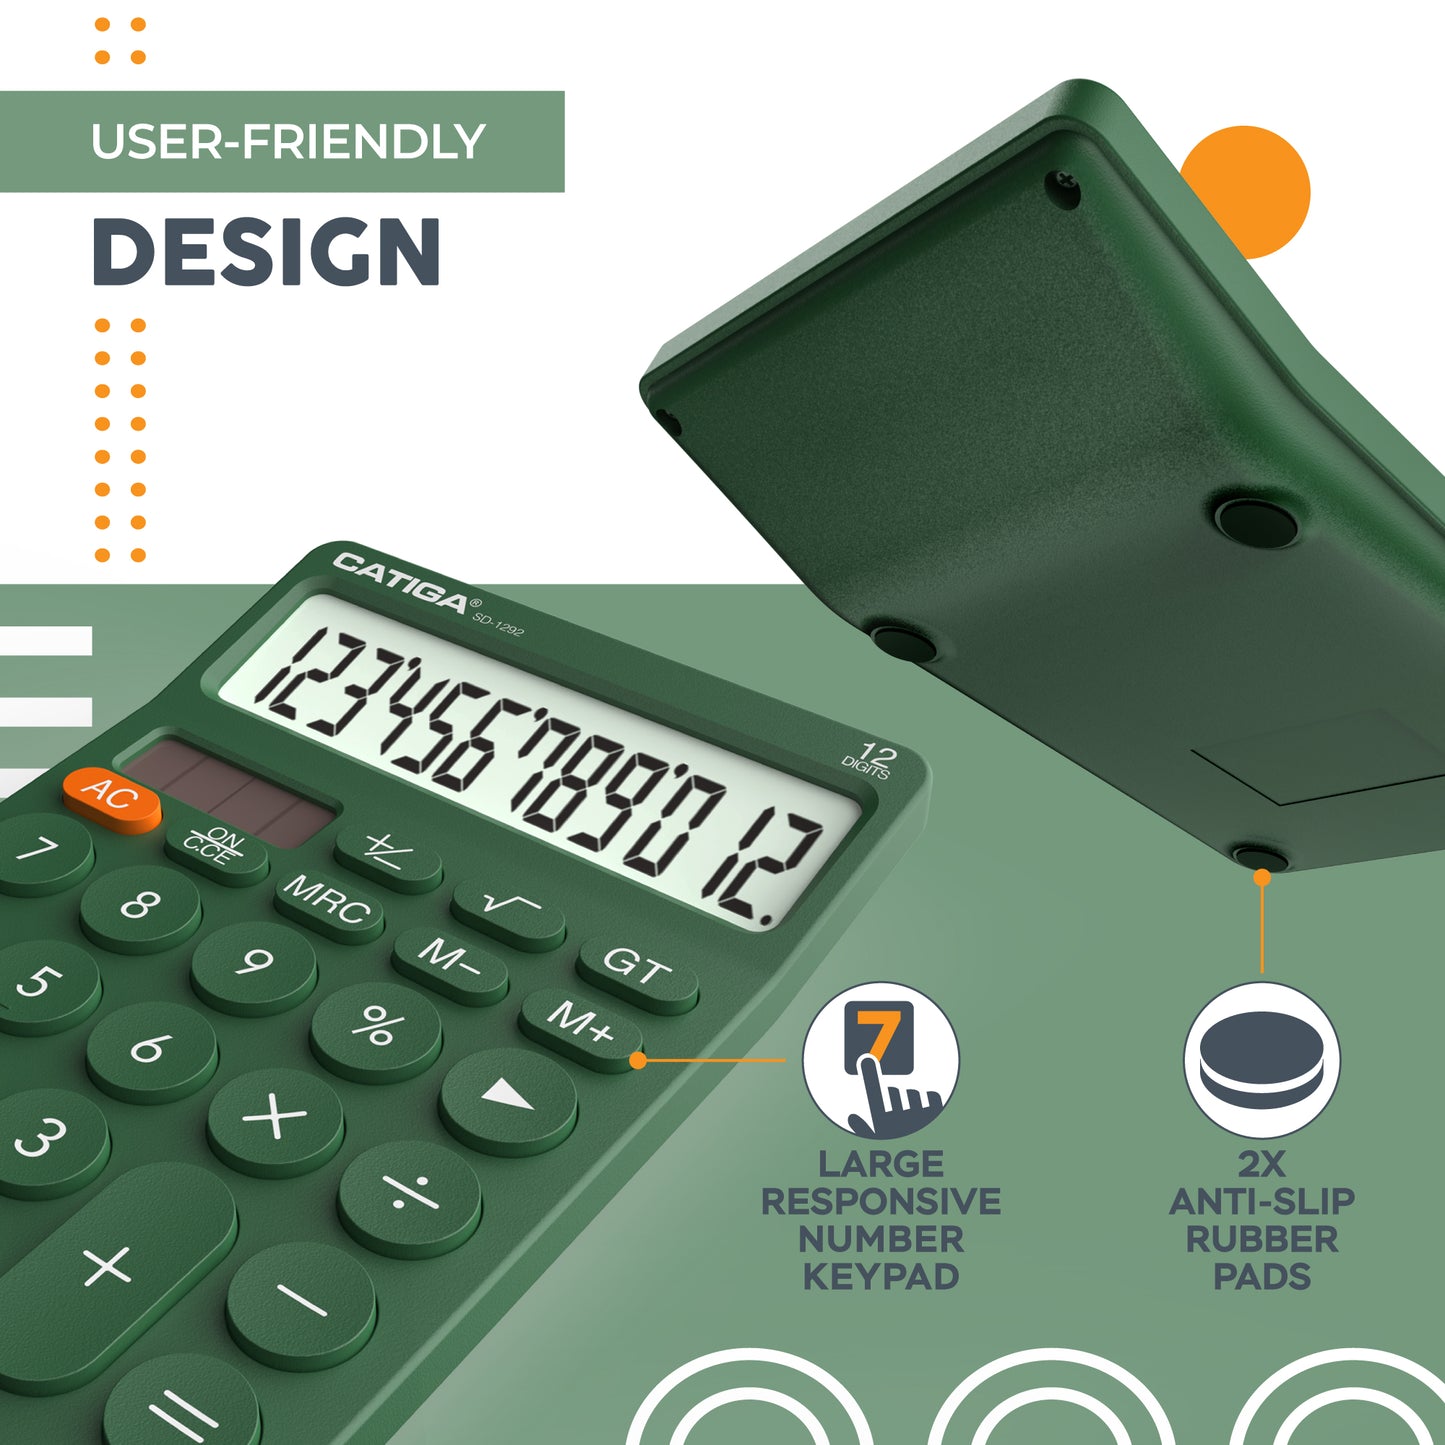 SD-1292 12-Digit Home and Office Calculator (Green)